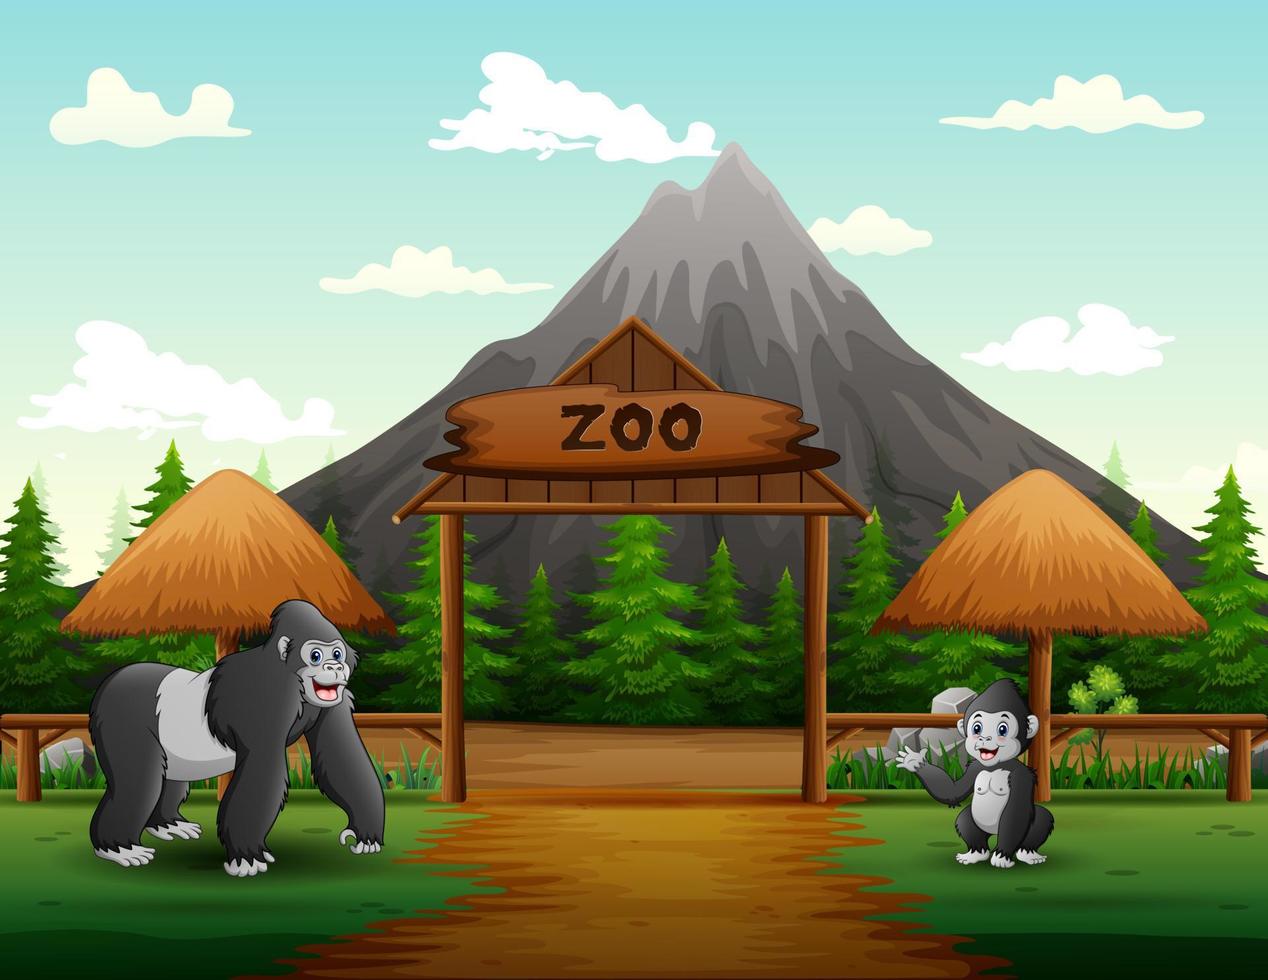 Cartoon a big gorilla with her cub in the zoo open illustration vector